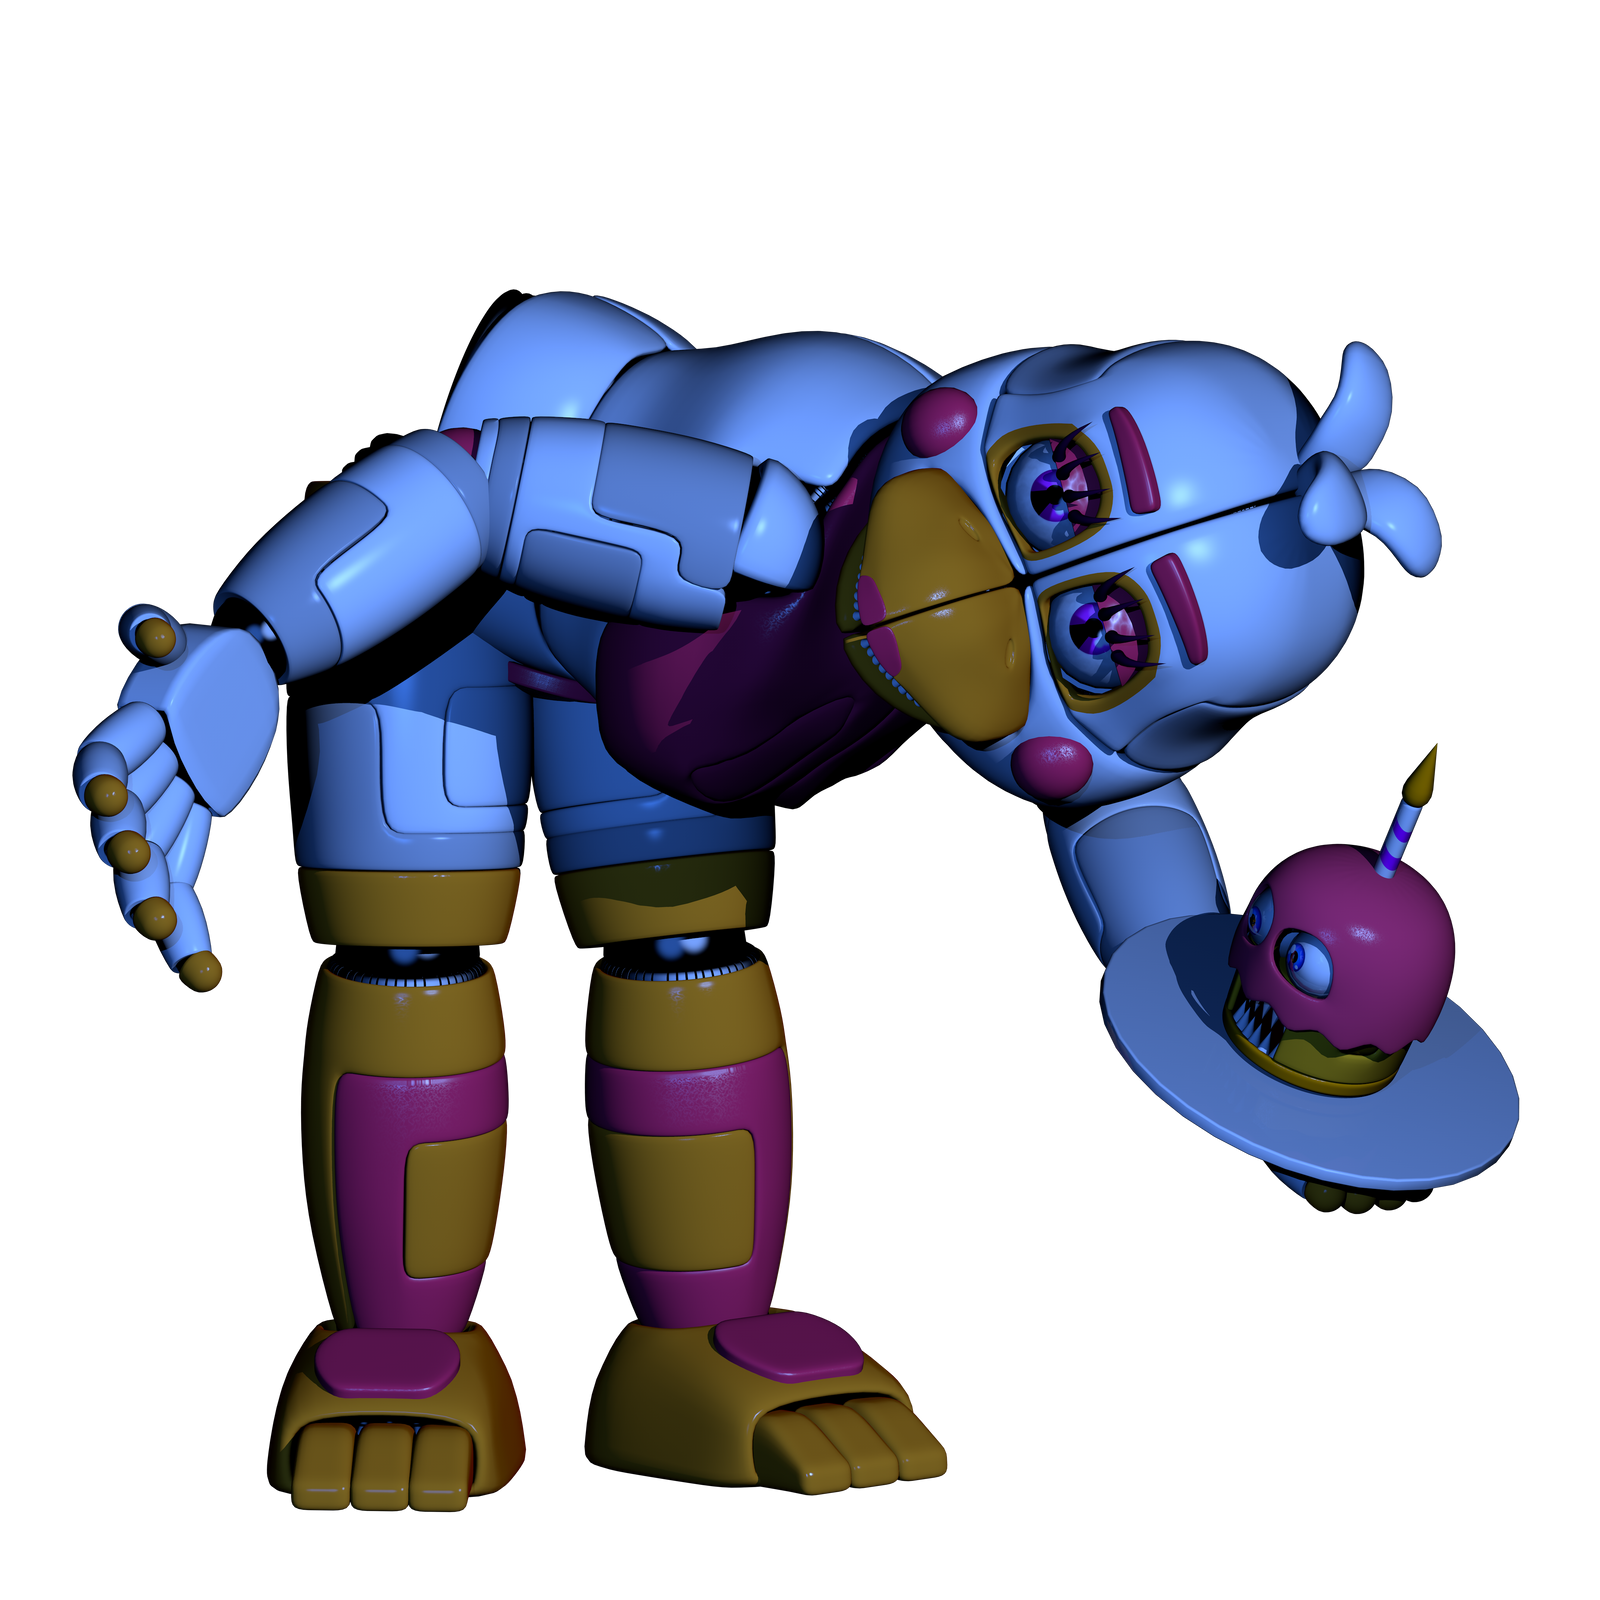 A funtime Chica existe? Baby Responde - BomBoing Studio 